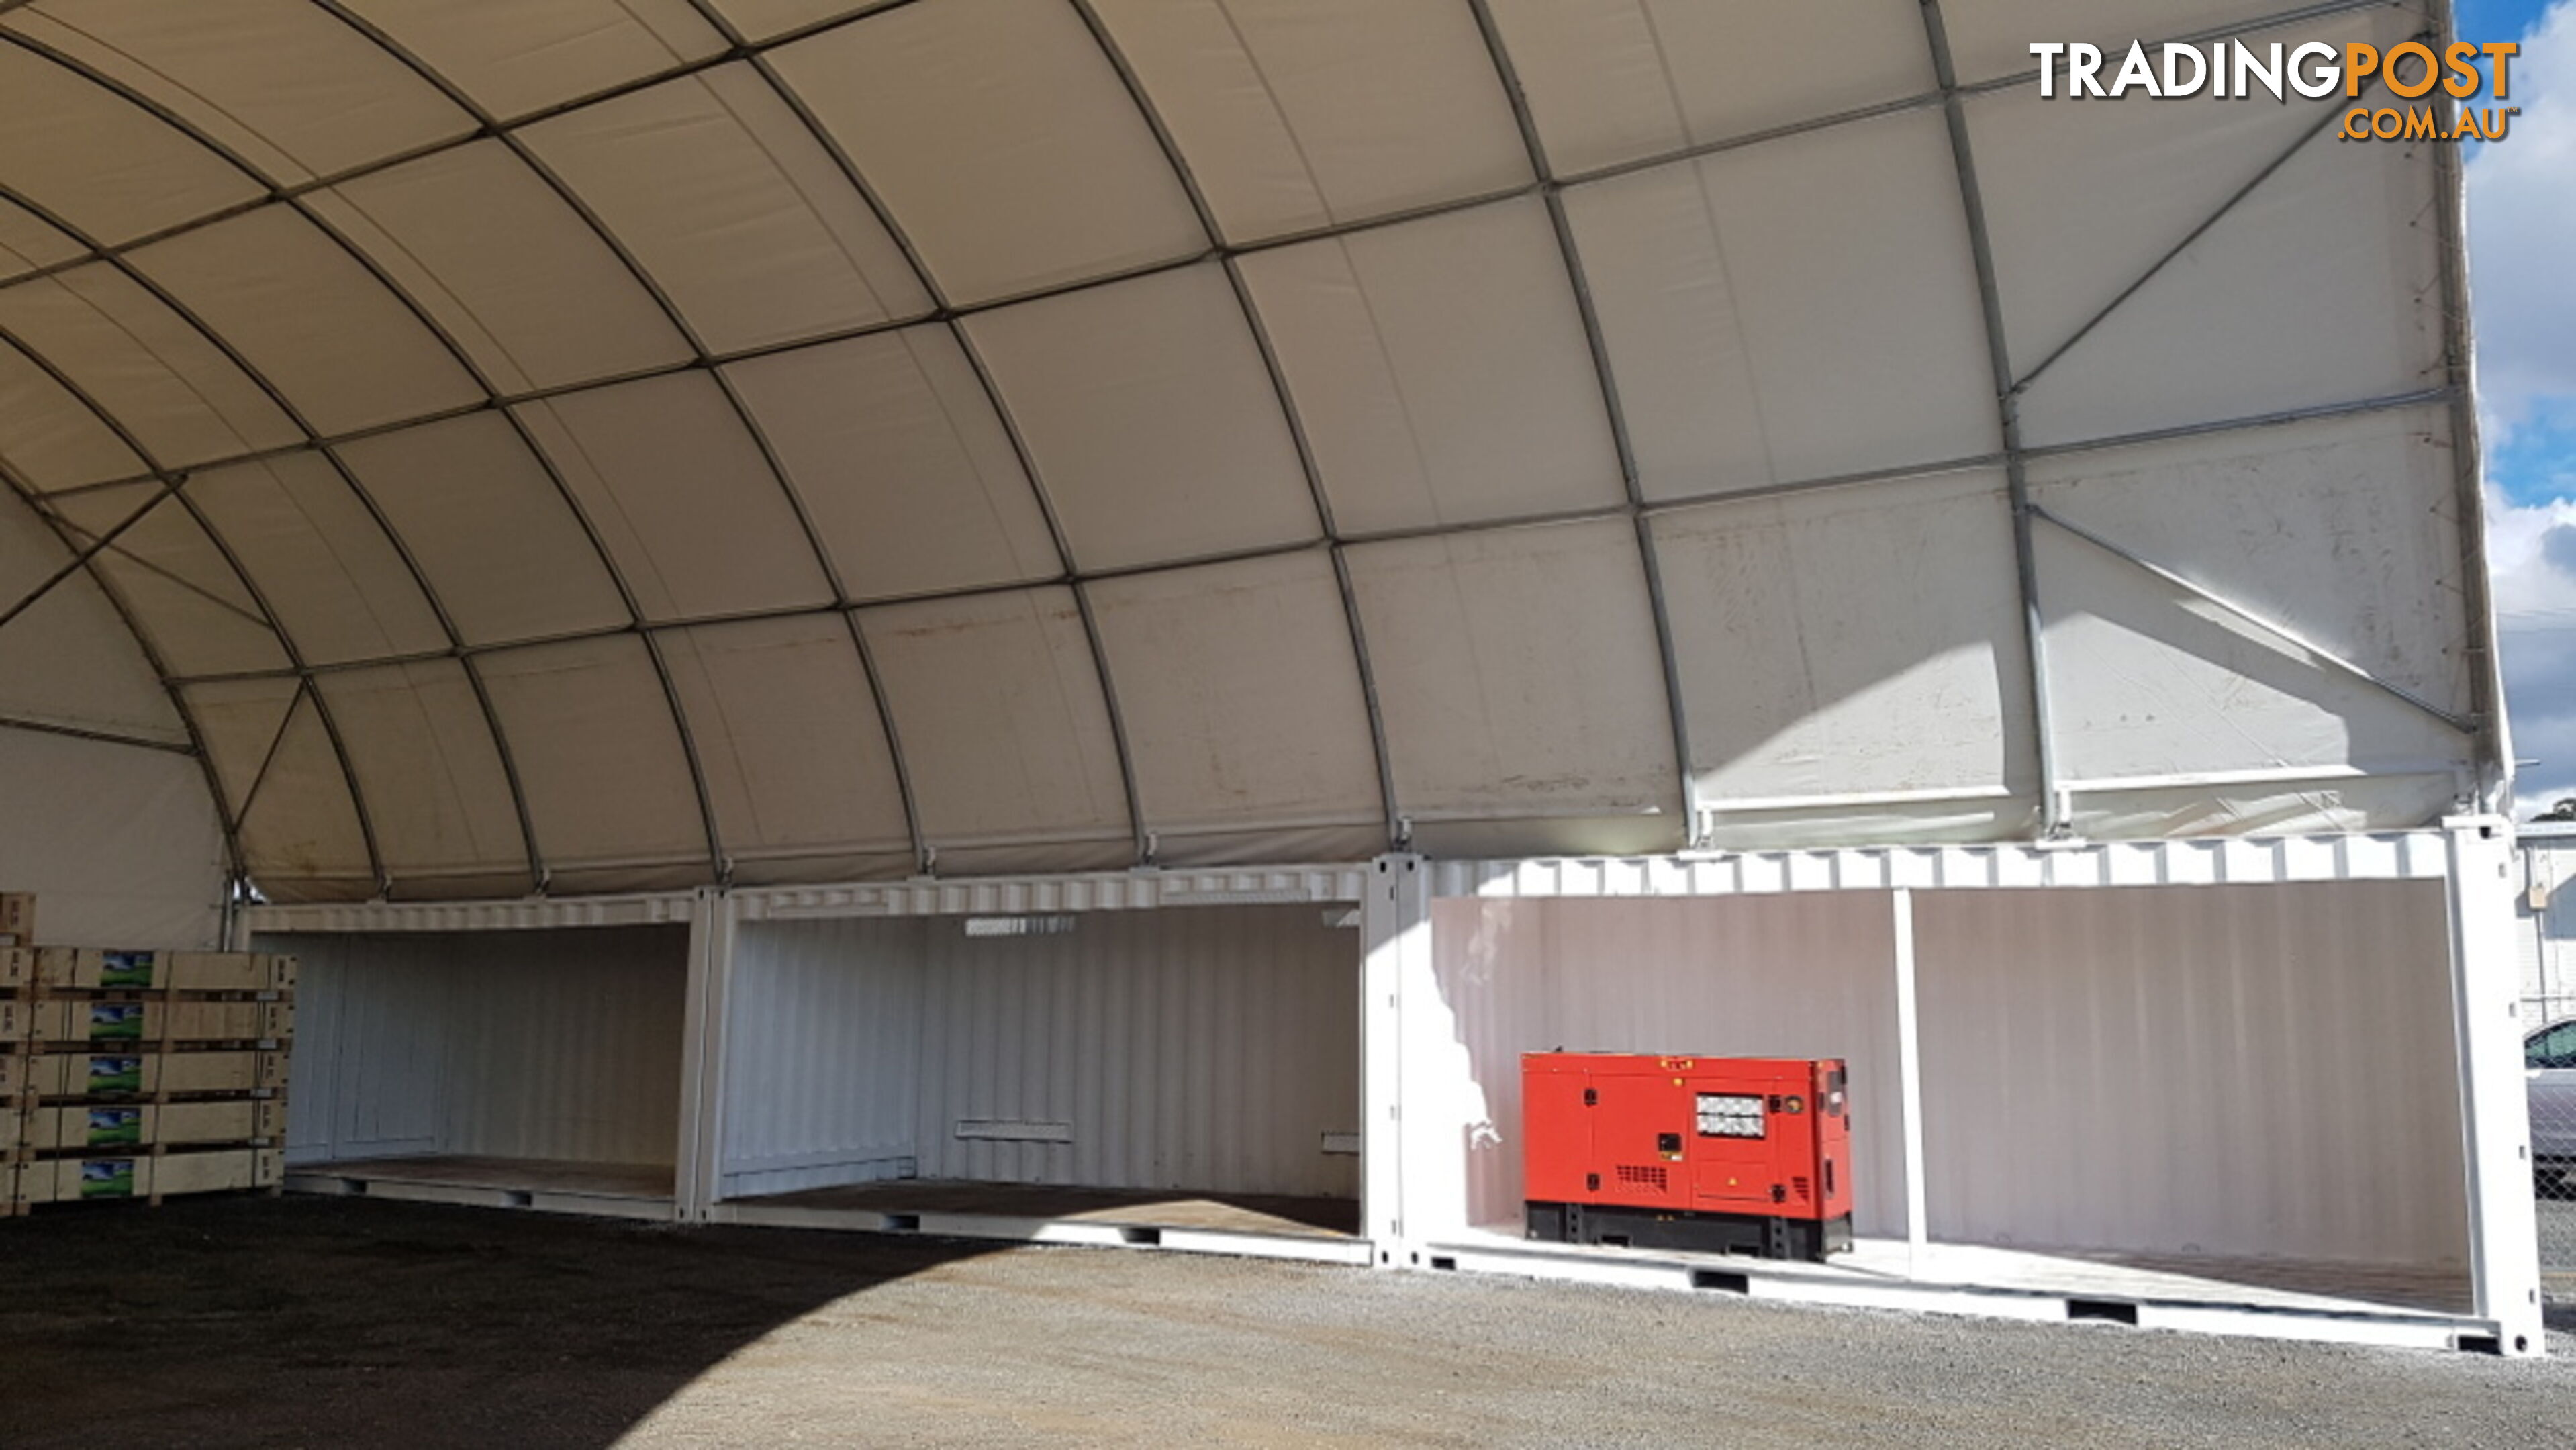 New 12m x 18m (223m2) Container Shelter Workshop Igloo Dome & Endwall